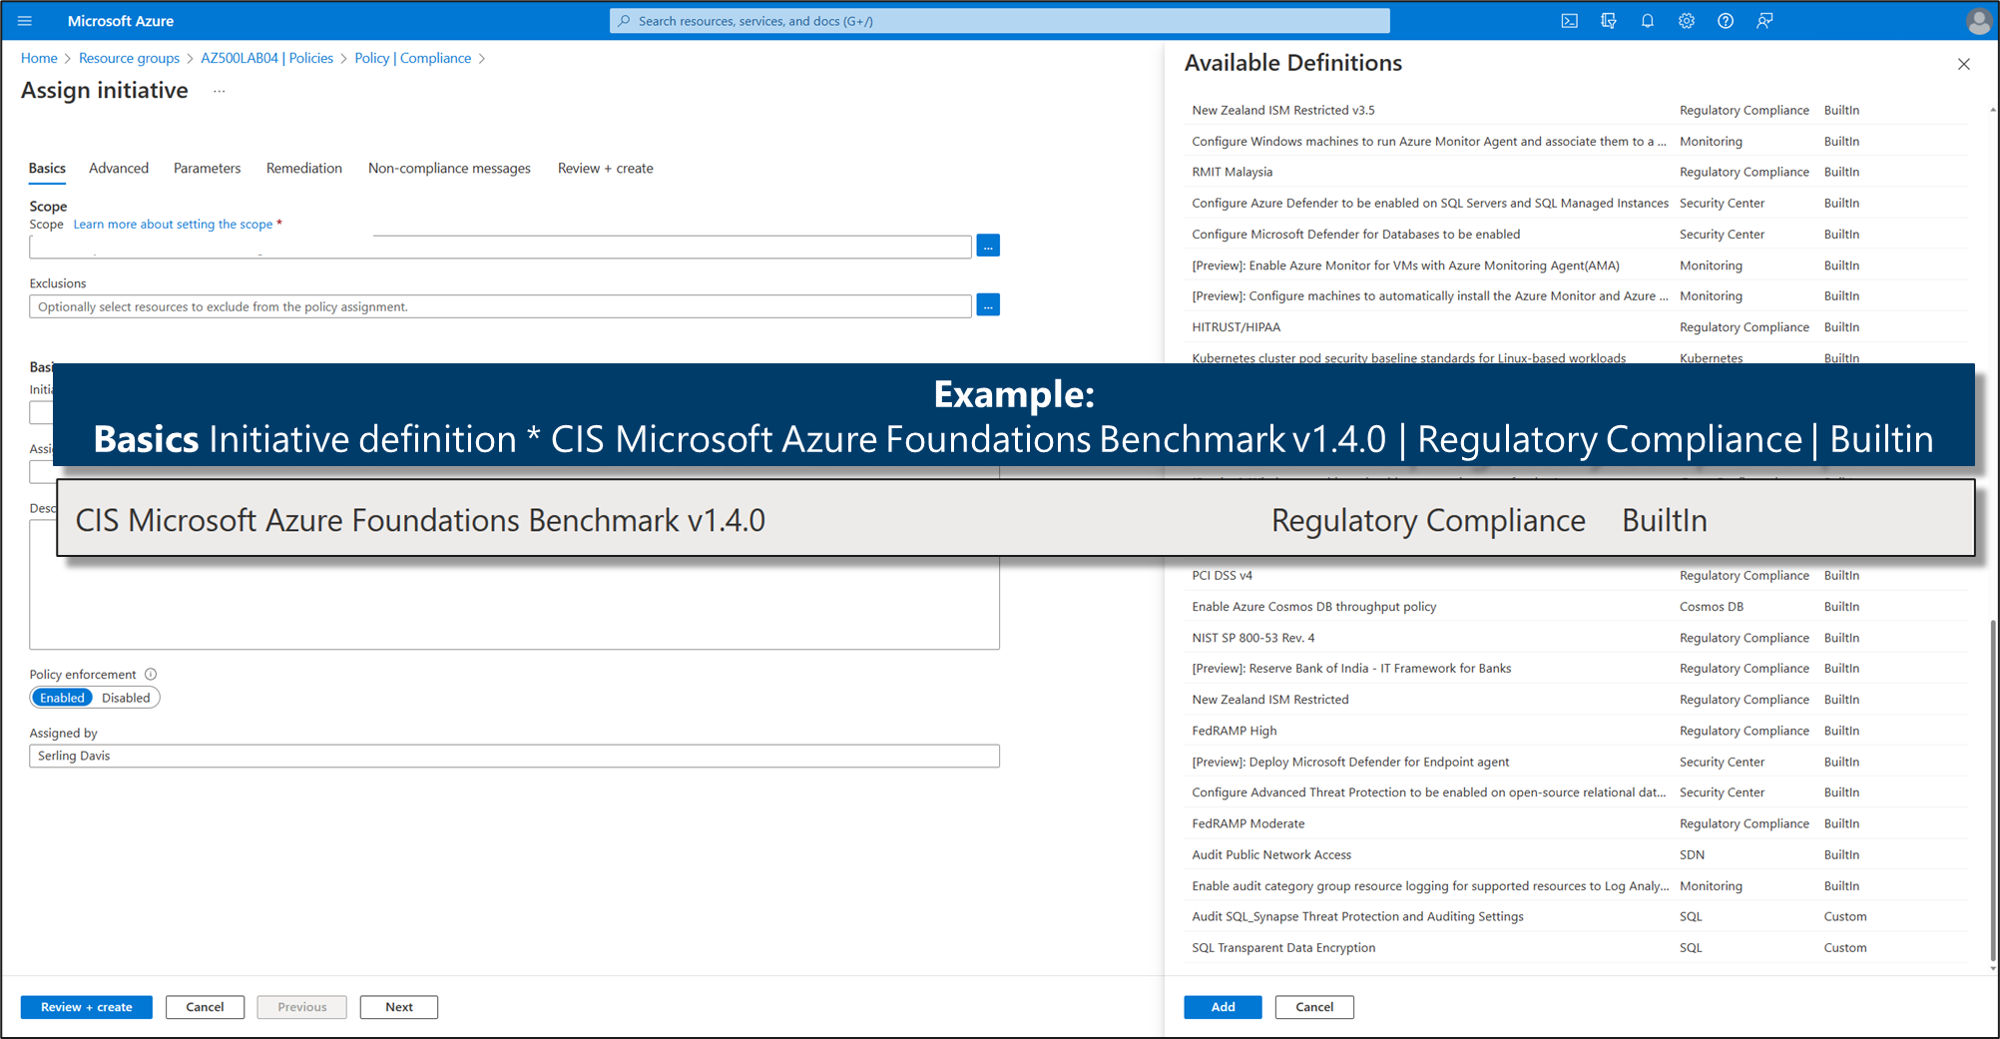 Screenshot showing an example of the CIS Microsoft Azure Foundations Benchmark.